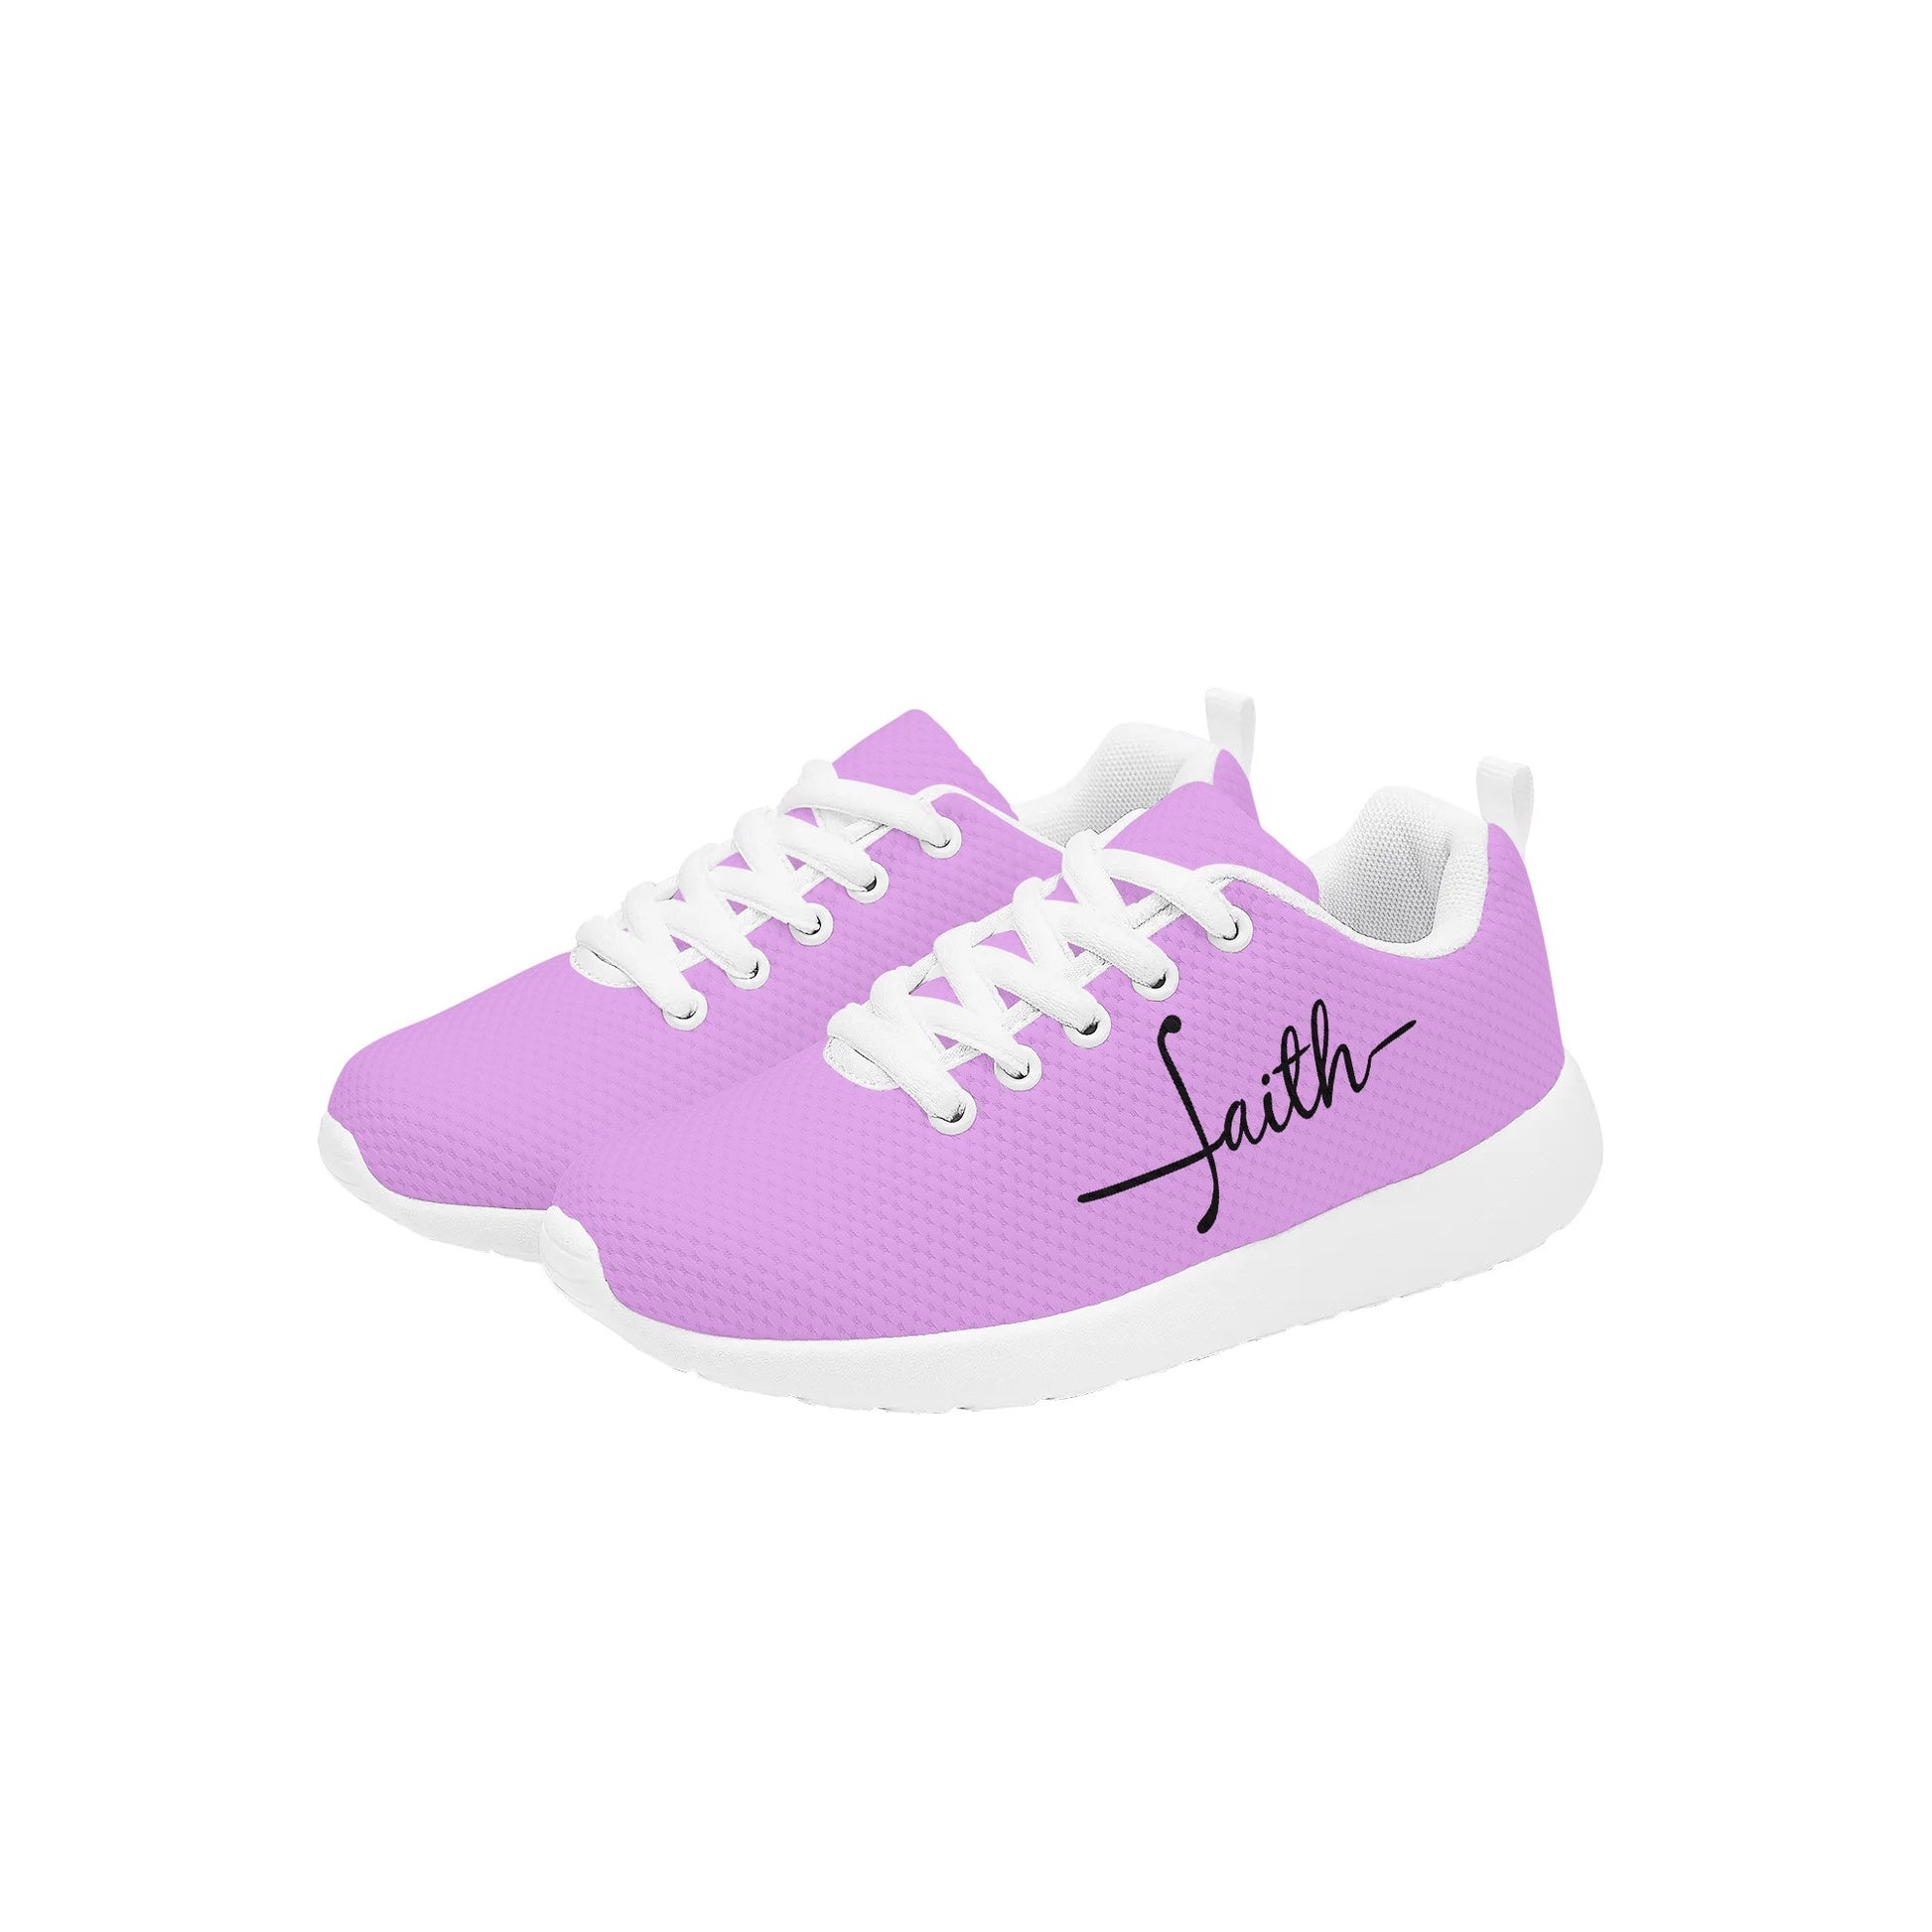 Faith Kids Lace-up Athletic Christian Sneakers popcustoms